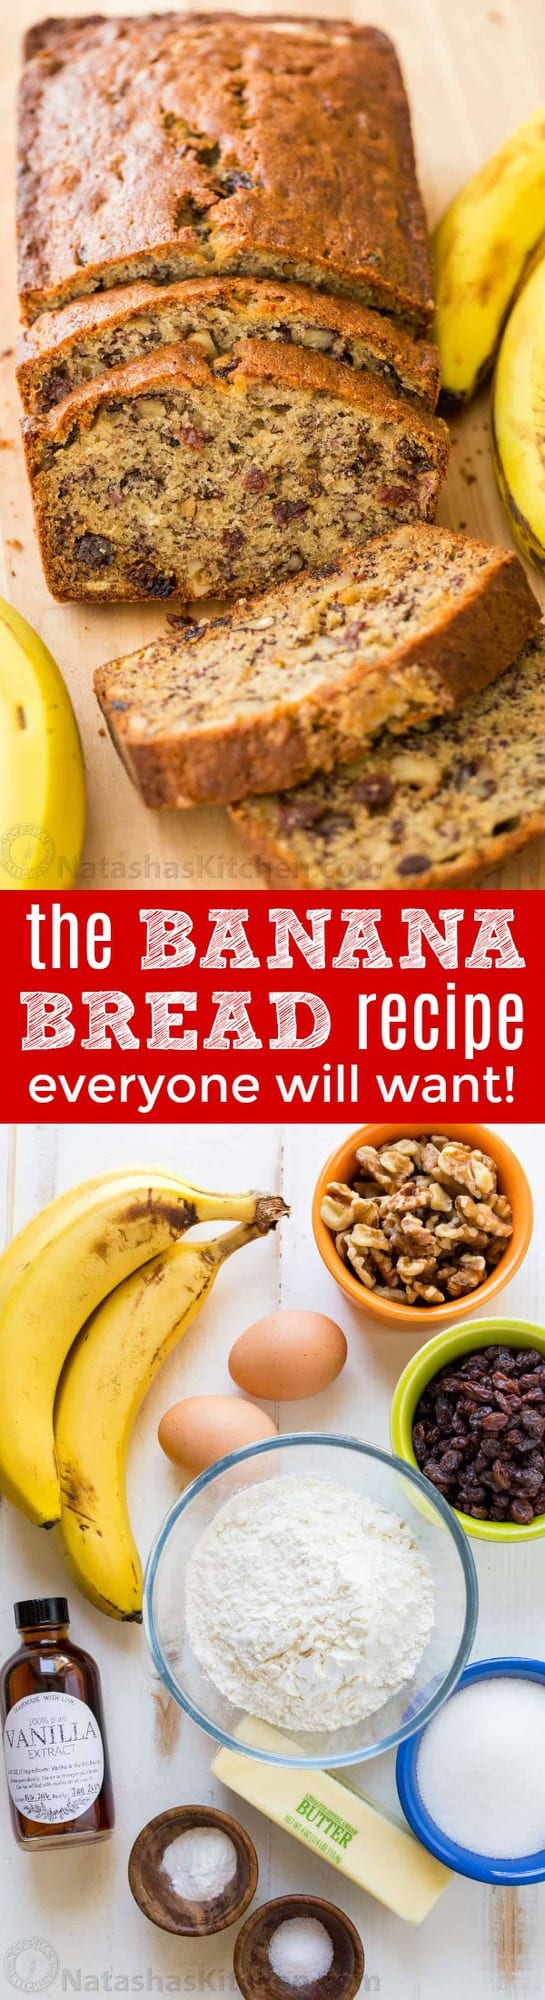 This Banana Bread Recipe is loaded with ripe bananas, tangy sweet raisins and toasted walnuts making it a banana nut bread. One of our favorite ripe banana recipes and even better with overripe bananas! This banana nut bread is super moist, easy and makes a great breakfast on-the-go. | natashaskitchen.com